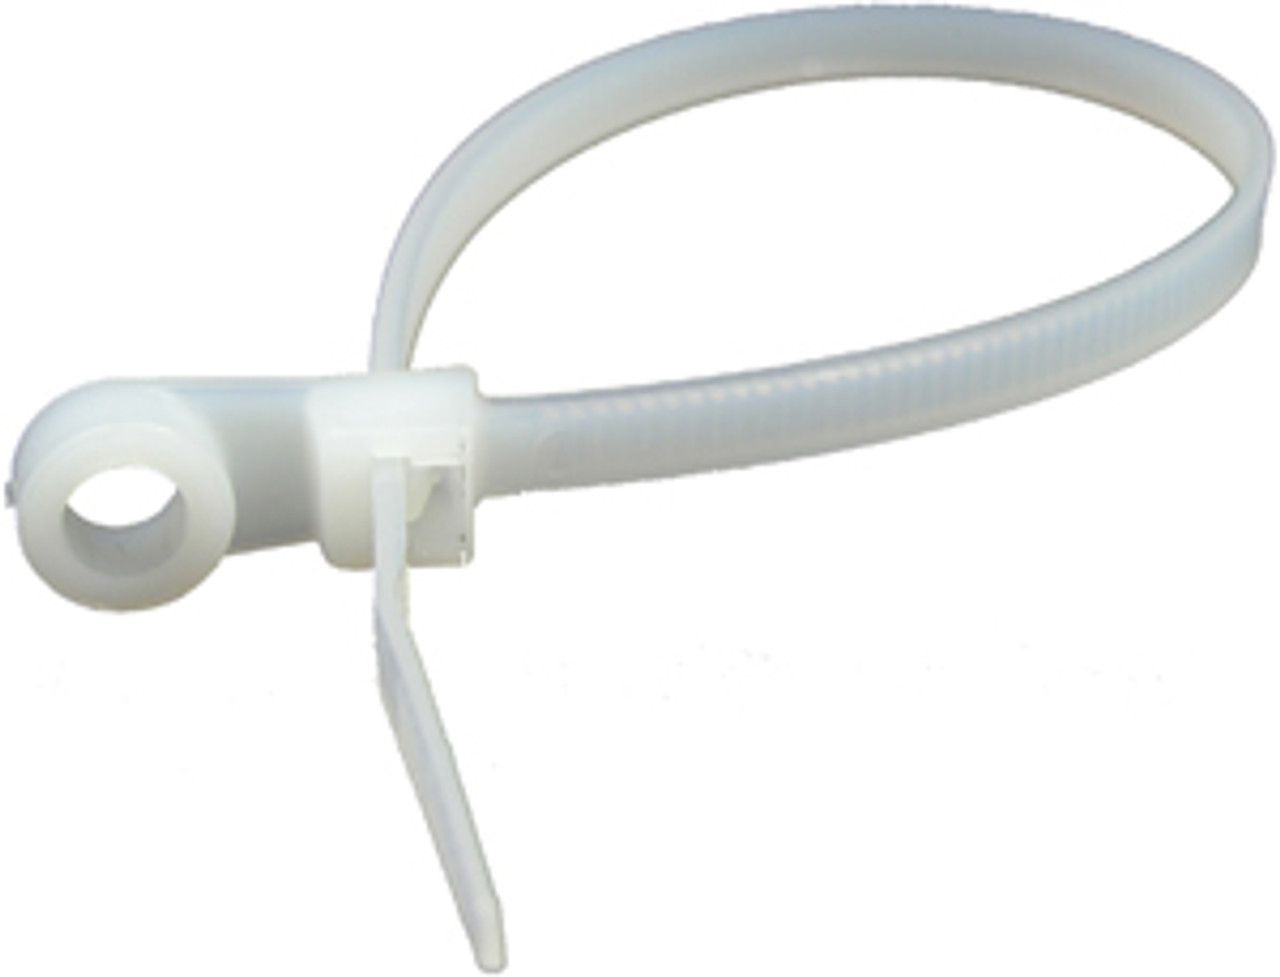 25 Pc. 14.5" 50 lb. Natural Standard Cable Tie w/Mount Tab   7076-PK